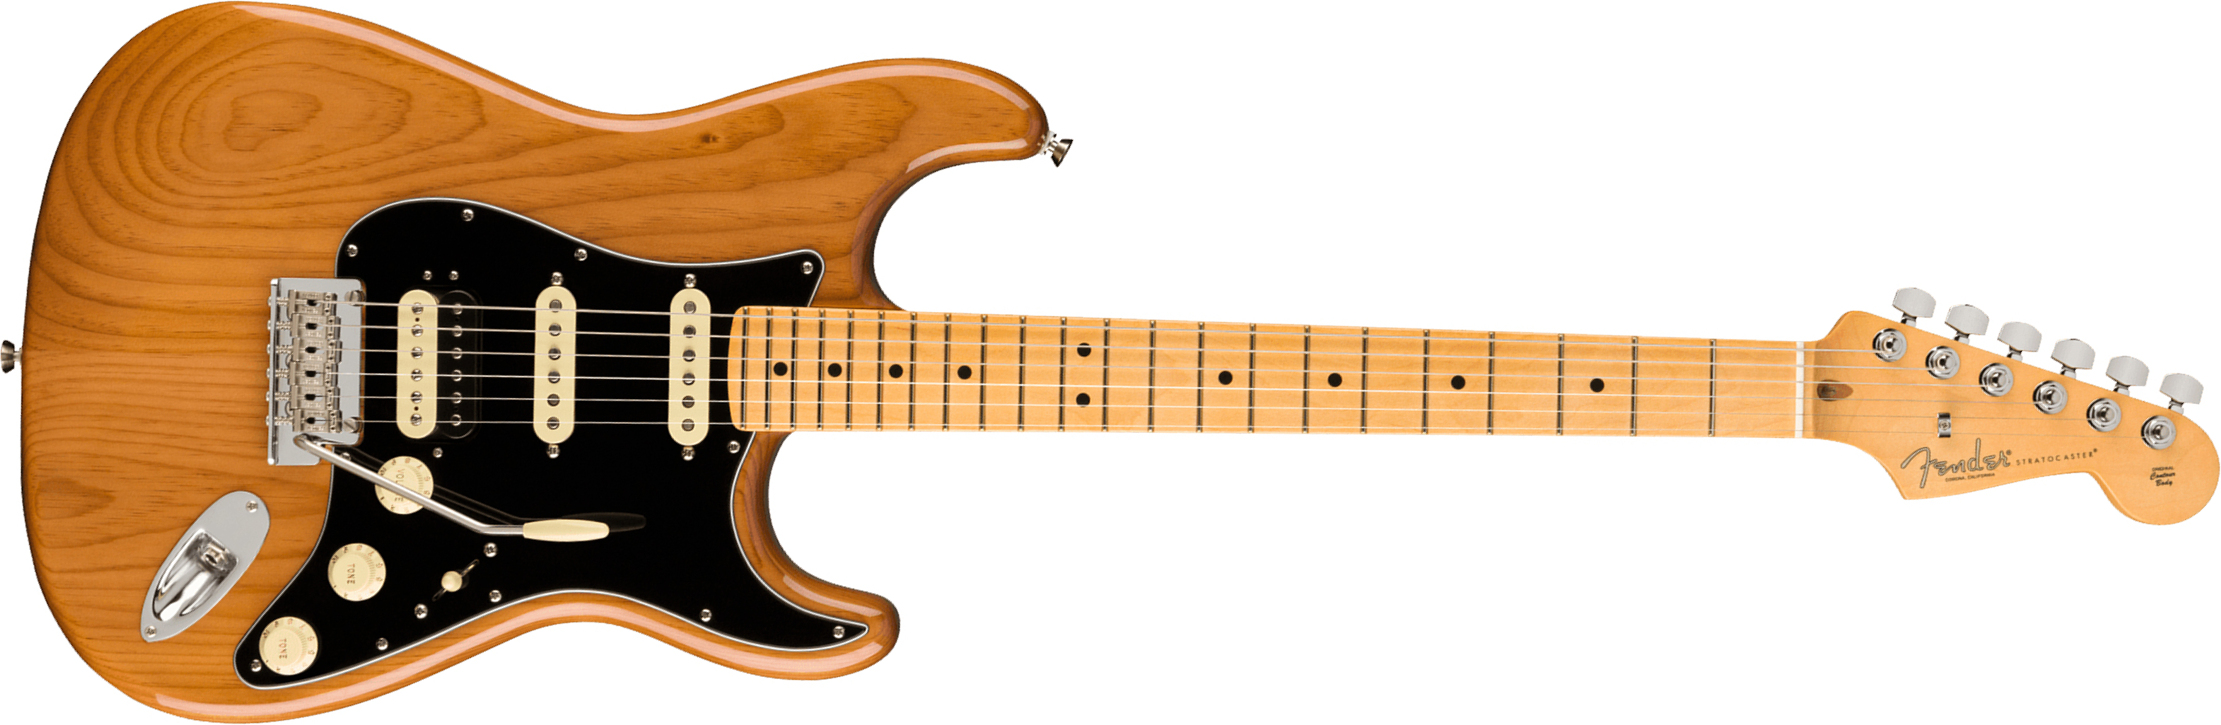 Fender Strat American Professional Ii Hss Usa Mn - Roasted Pine - E-Gitarre in Str-Form - Main picture